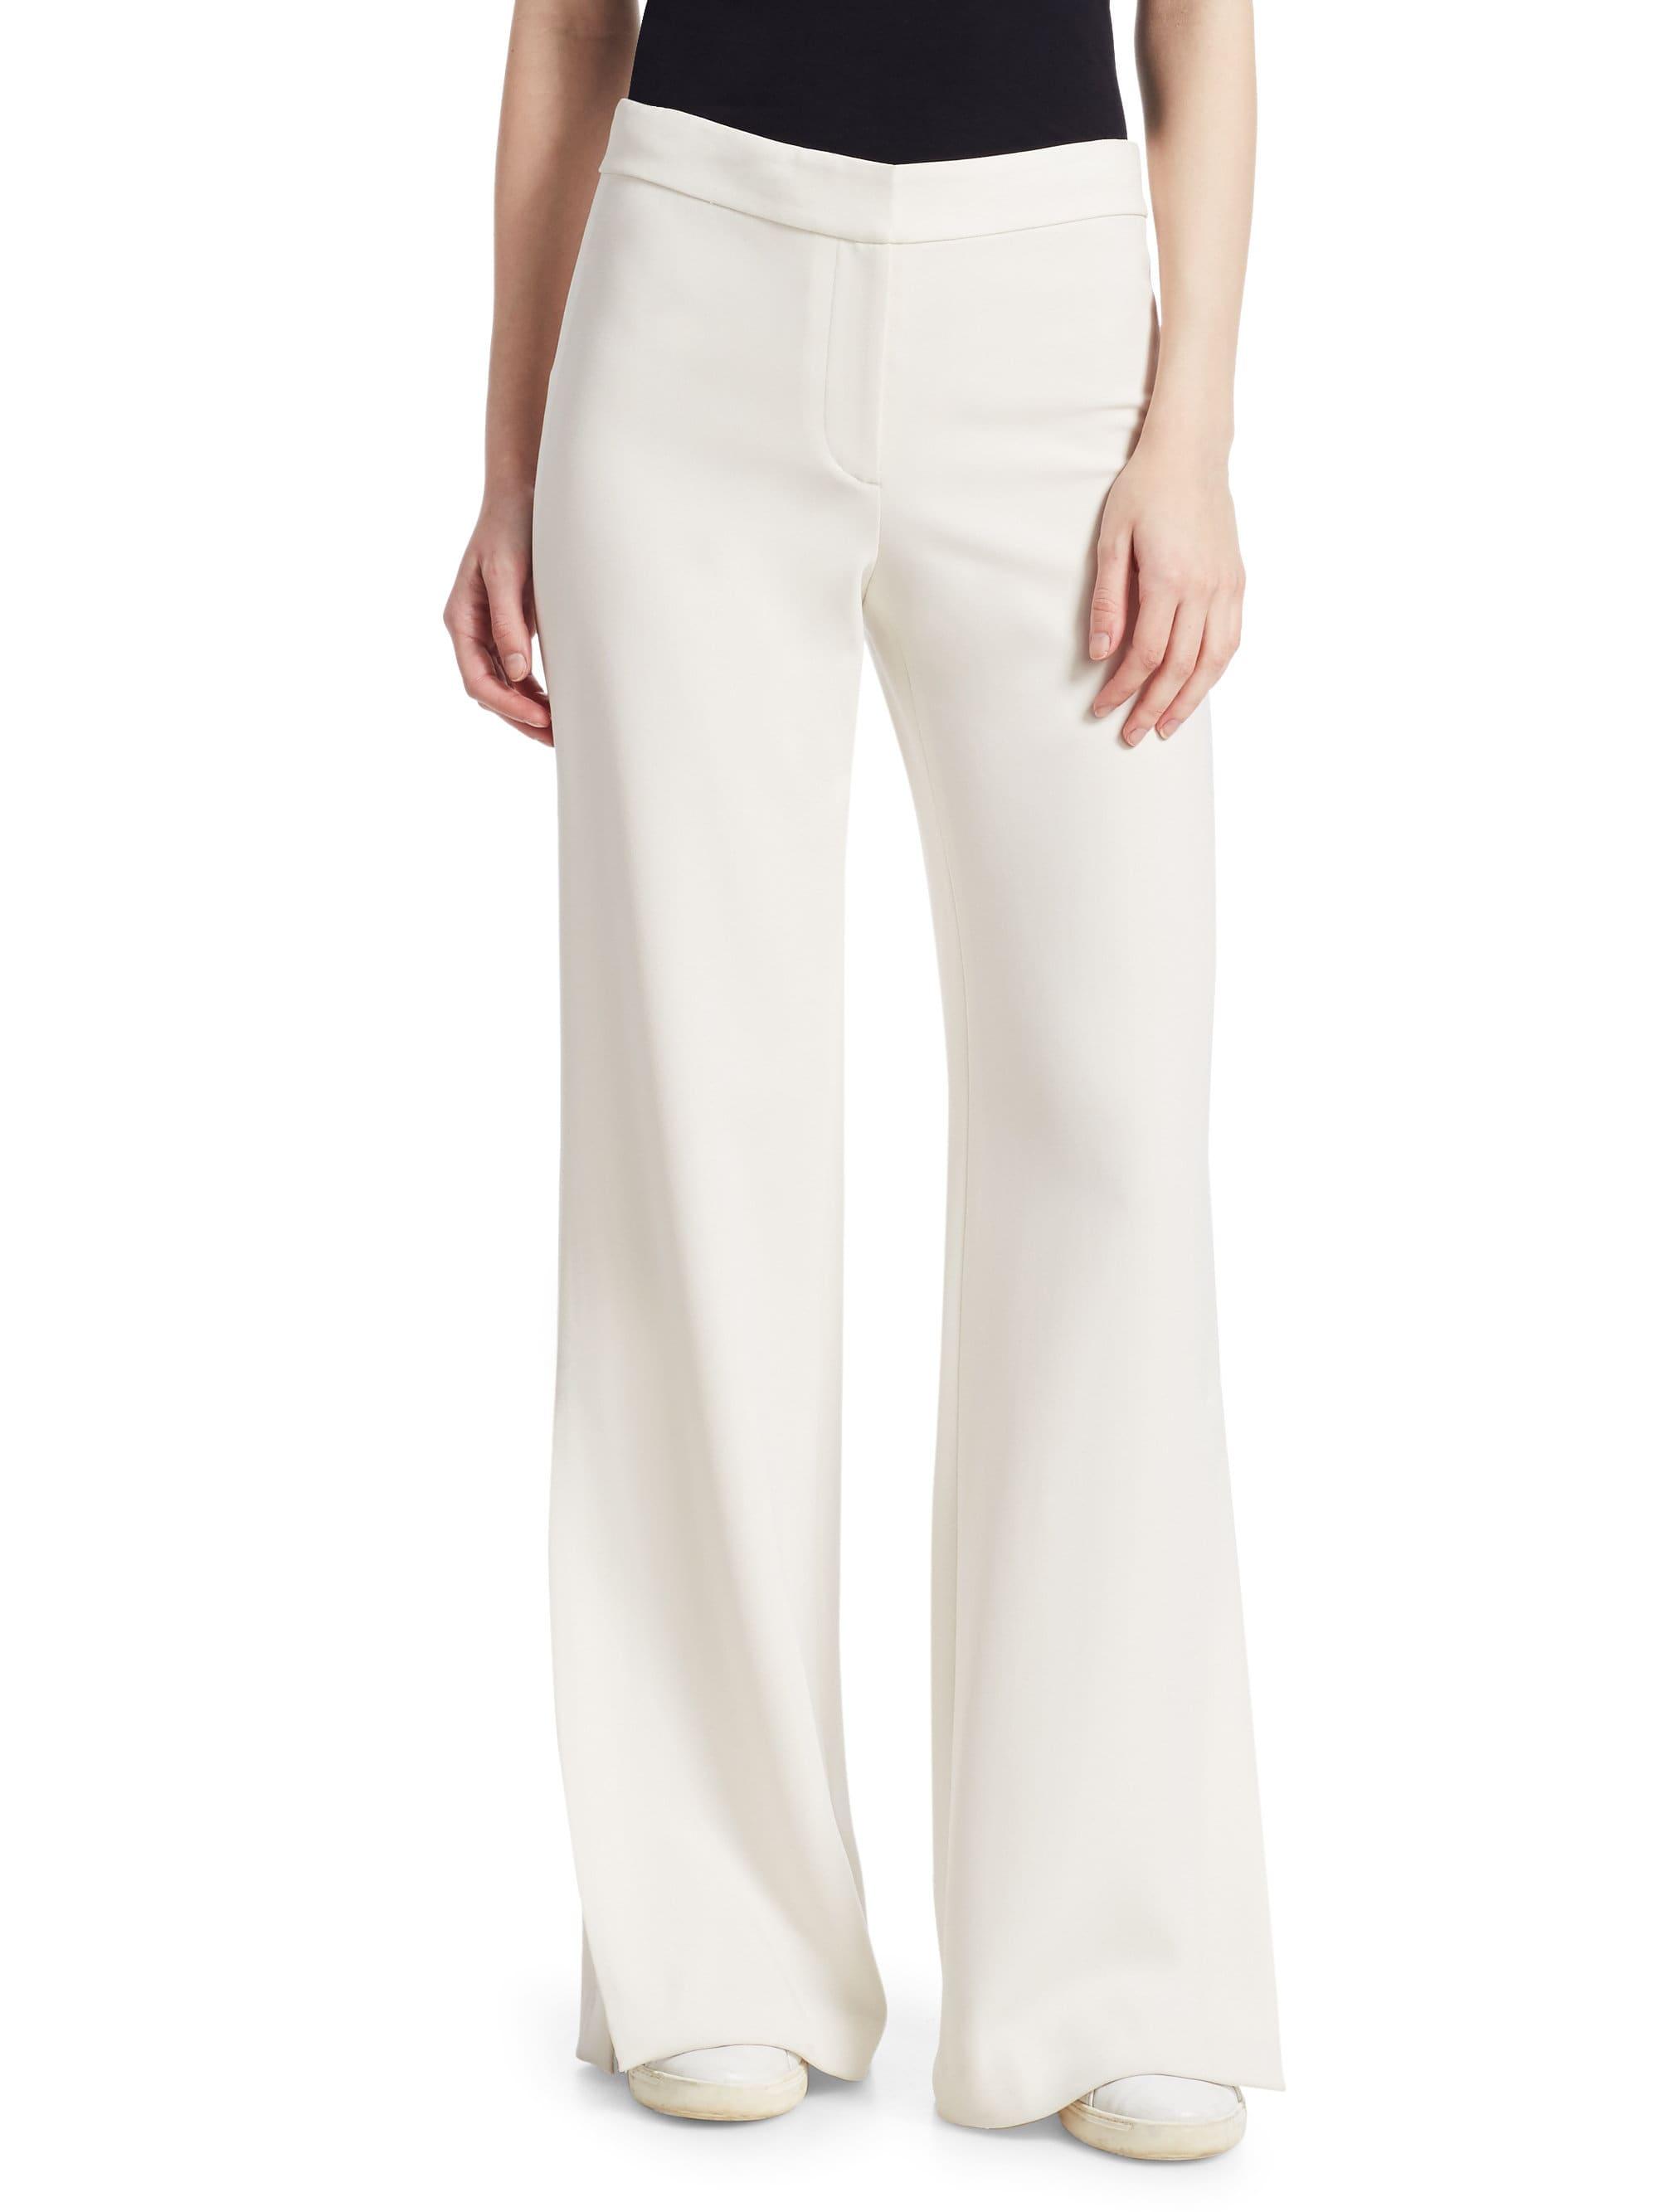 Theory High Slit Pant in Ivory (White) - Lyst